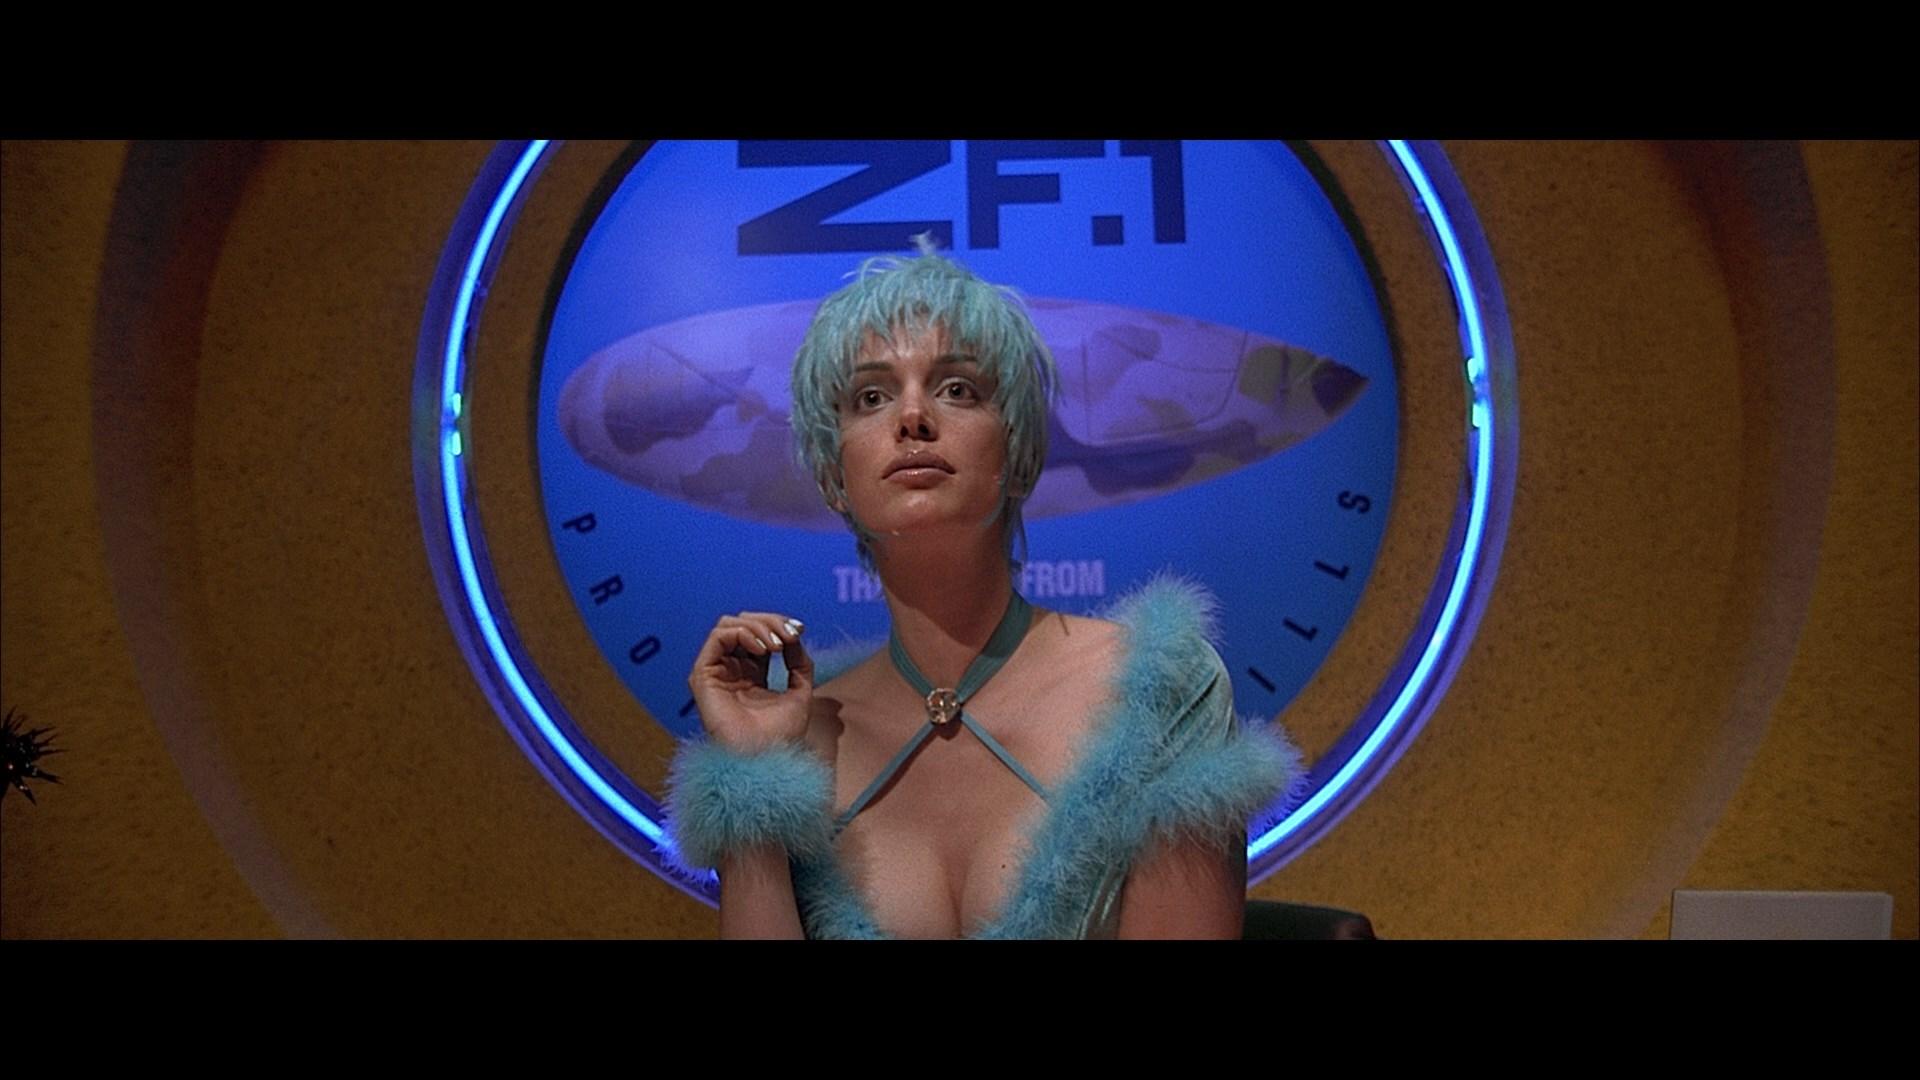 the fifth element, image, wall, pic 1920x1080